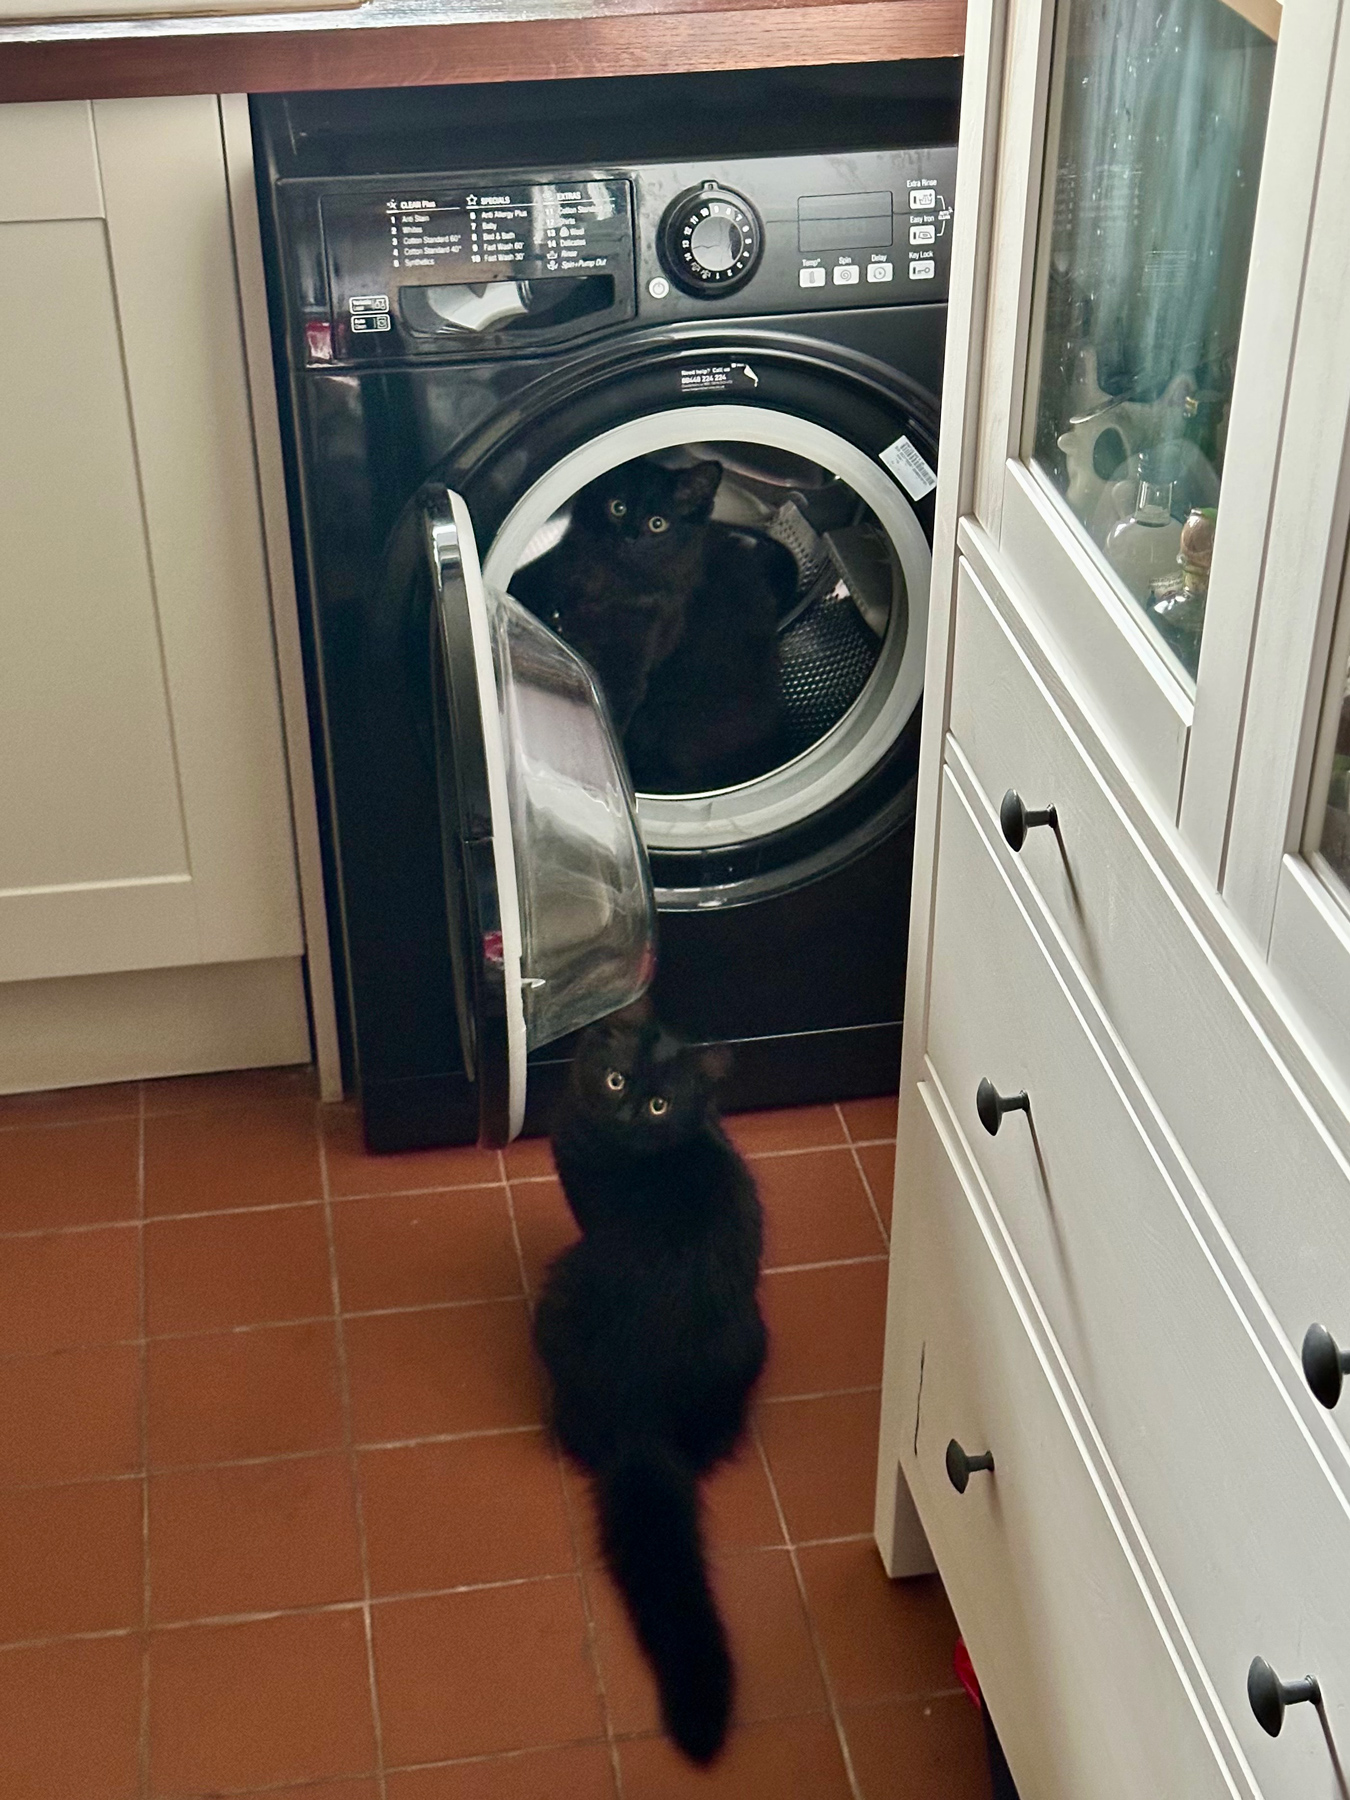 On small black kitten inside a washing machine with another sat beside it. They're both looking at the camera with an expression of guilt.